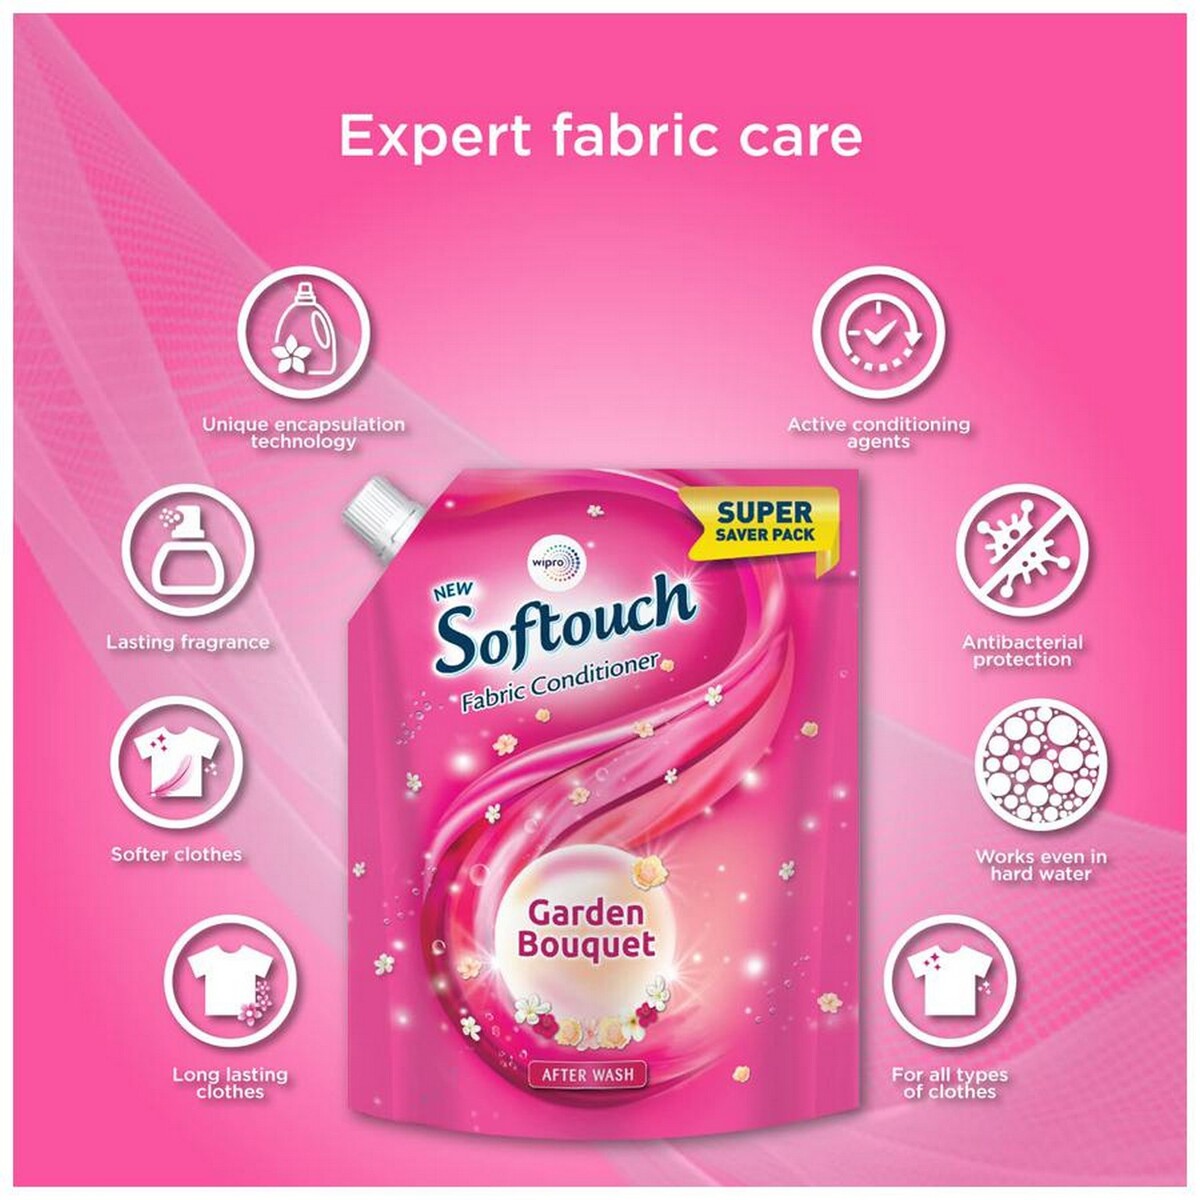 Softouch Garden Bouquet Fabric Conditioner 2L